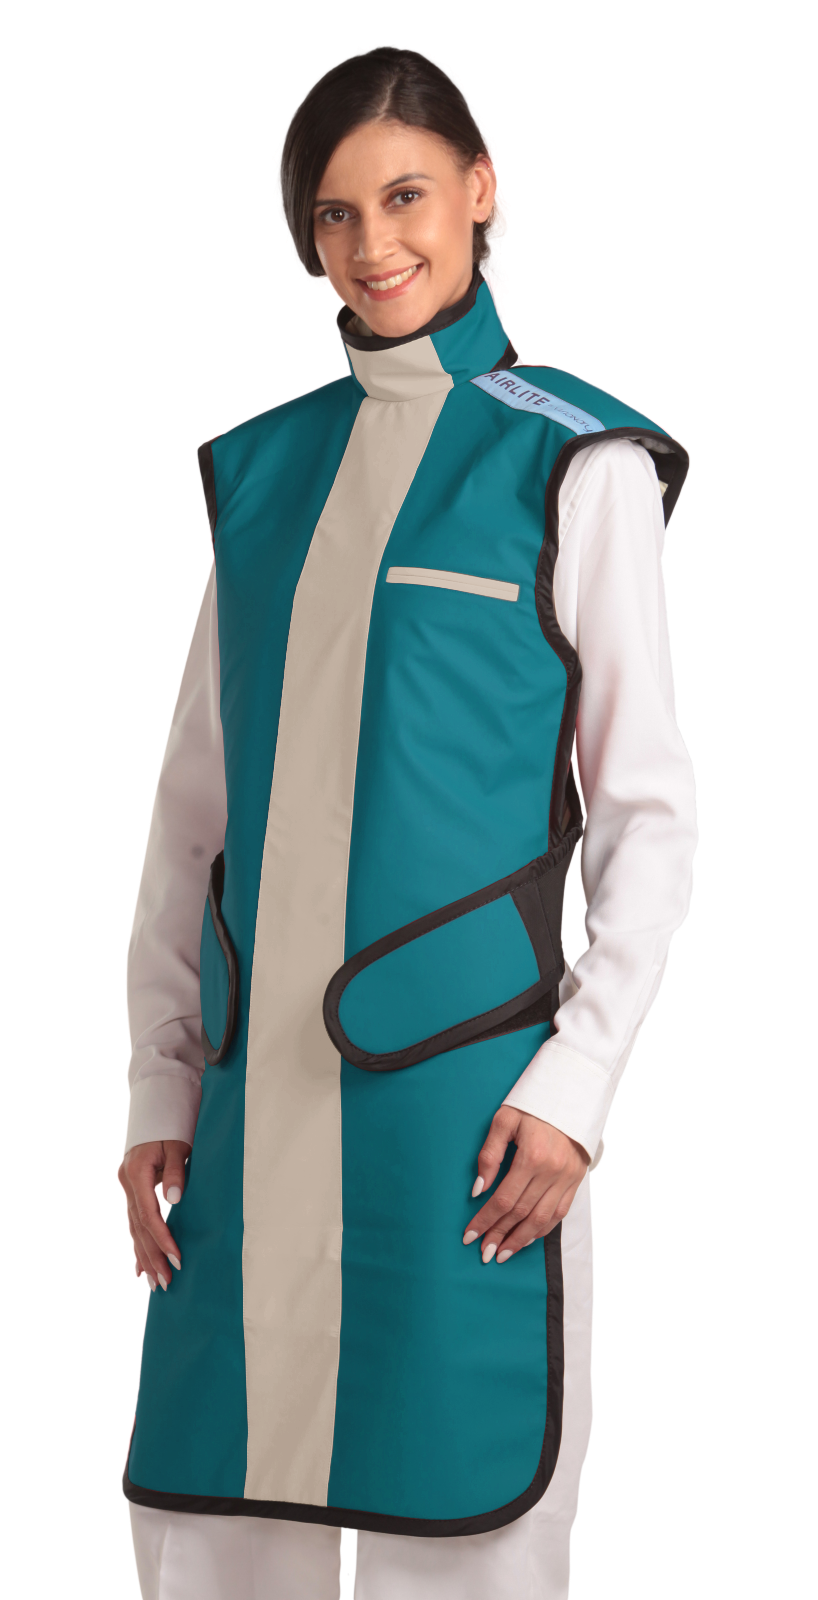 Frontal left-side view of a female model wearing a coat apron with an integrated thyroid guard. The apron is ocean green with a beige-colored center line and has velcro fasteners by the sides.